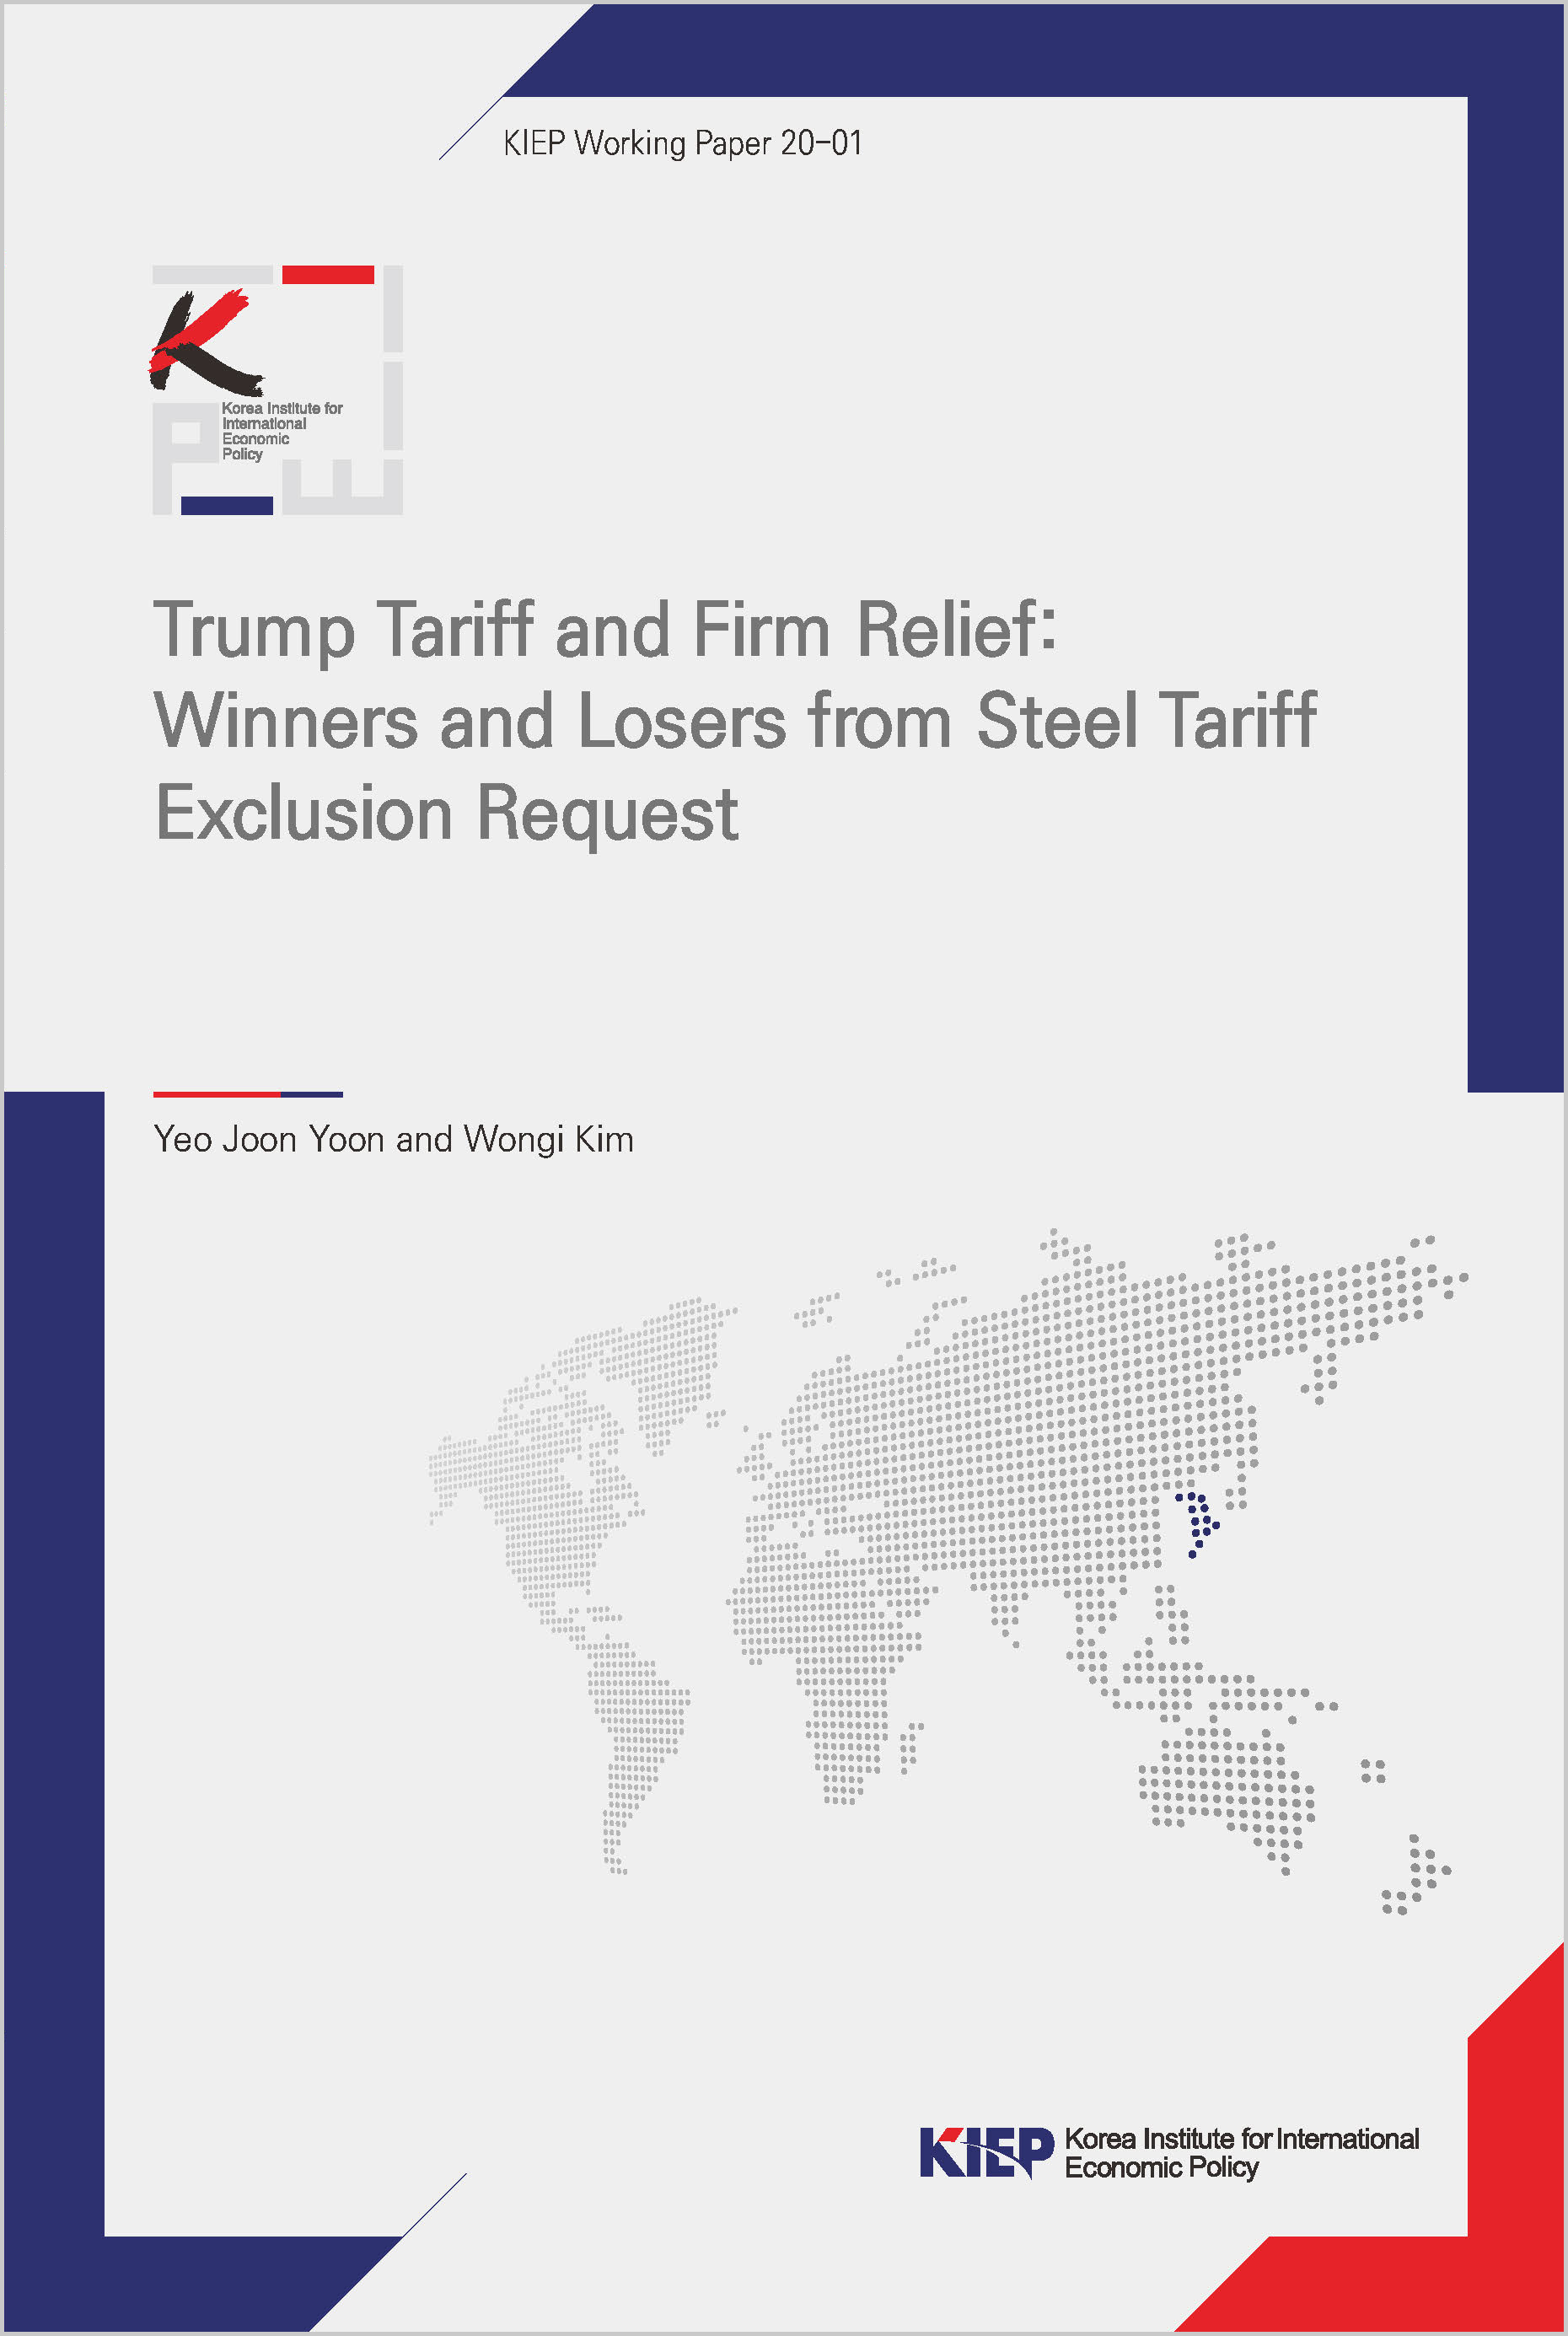 Trump Tariff and Firm Relief: Winners and Losers from Steel Tariff Exclusion Req..